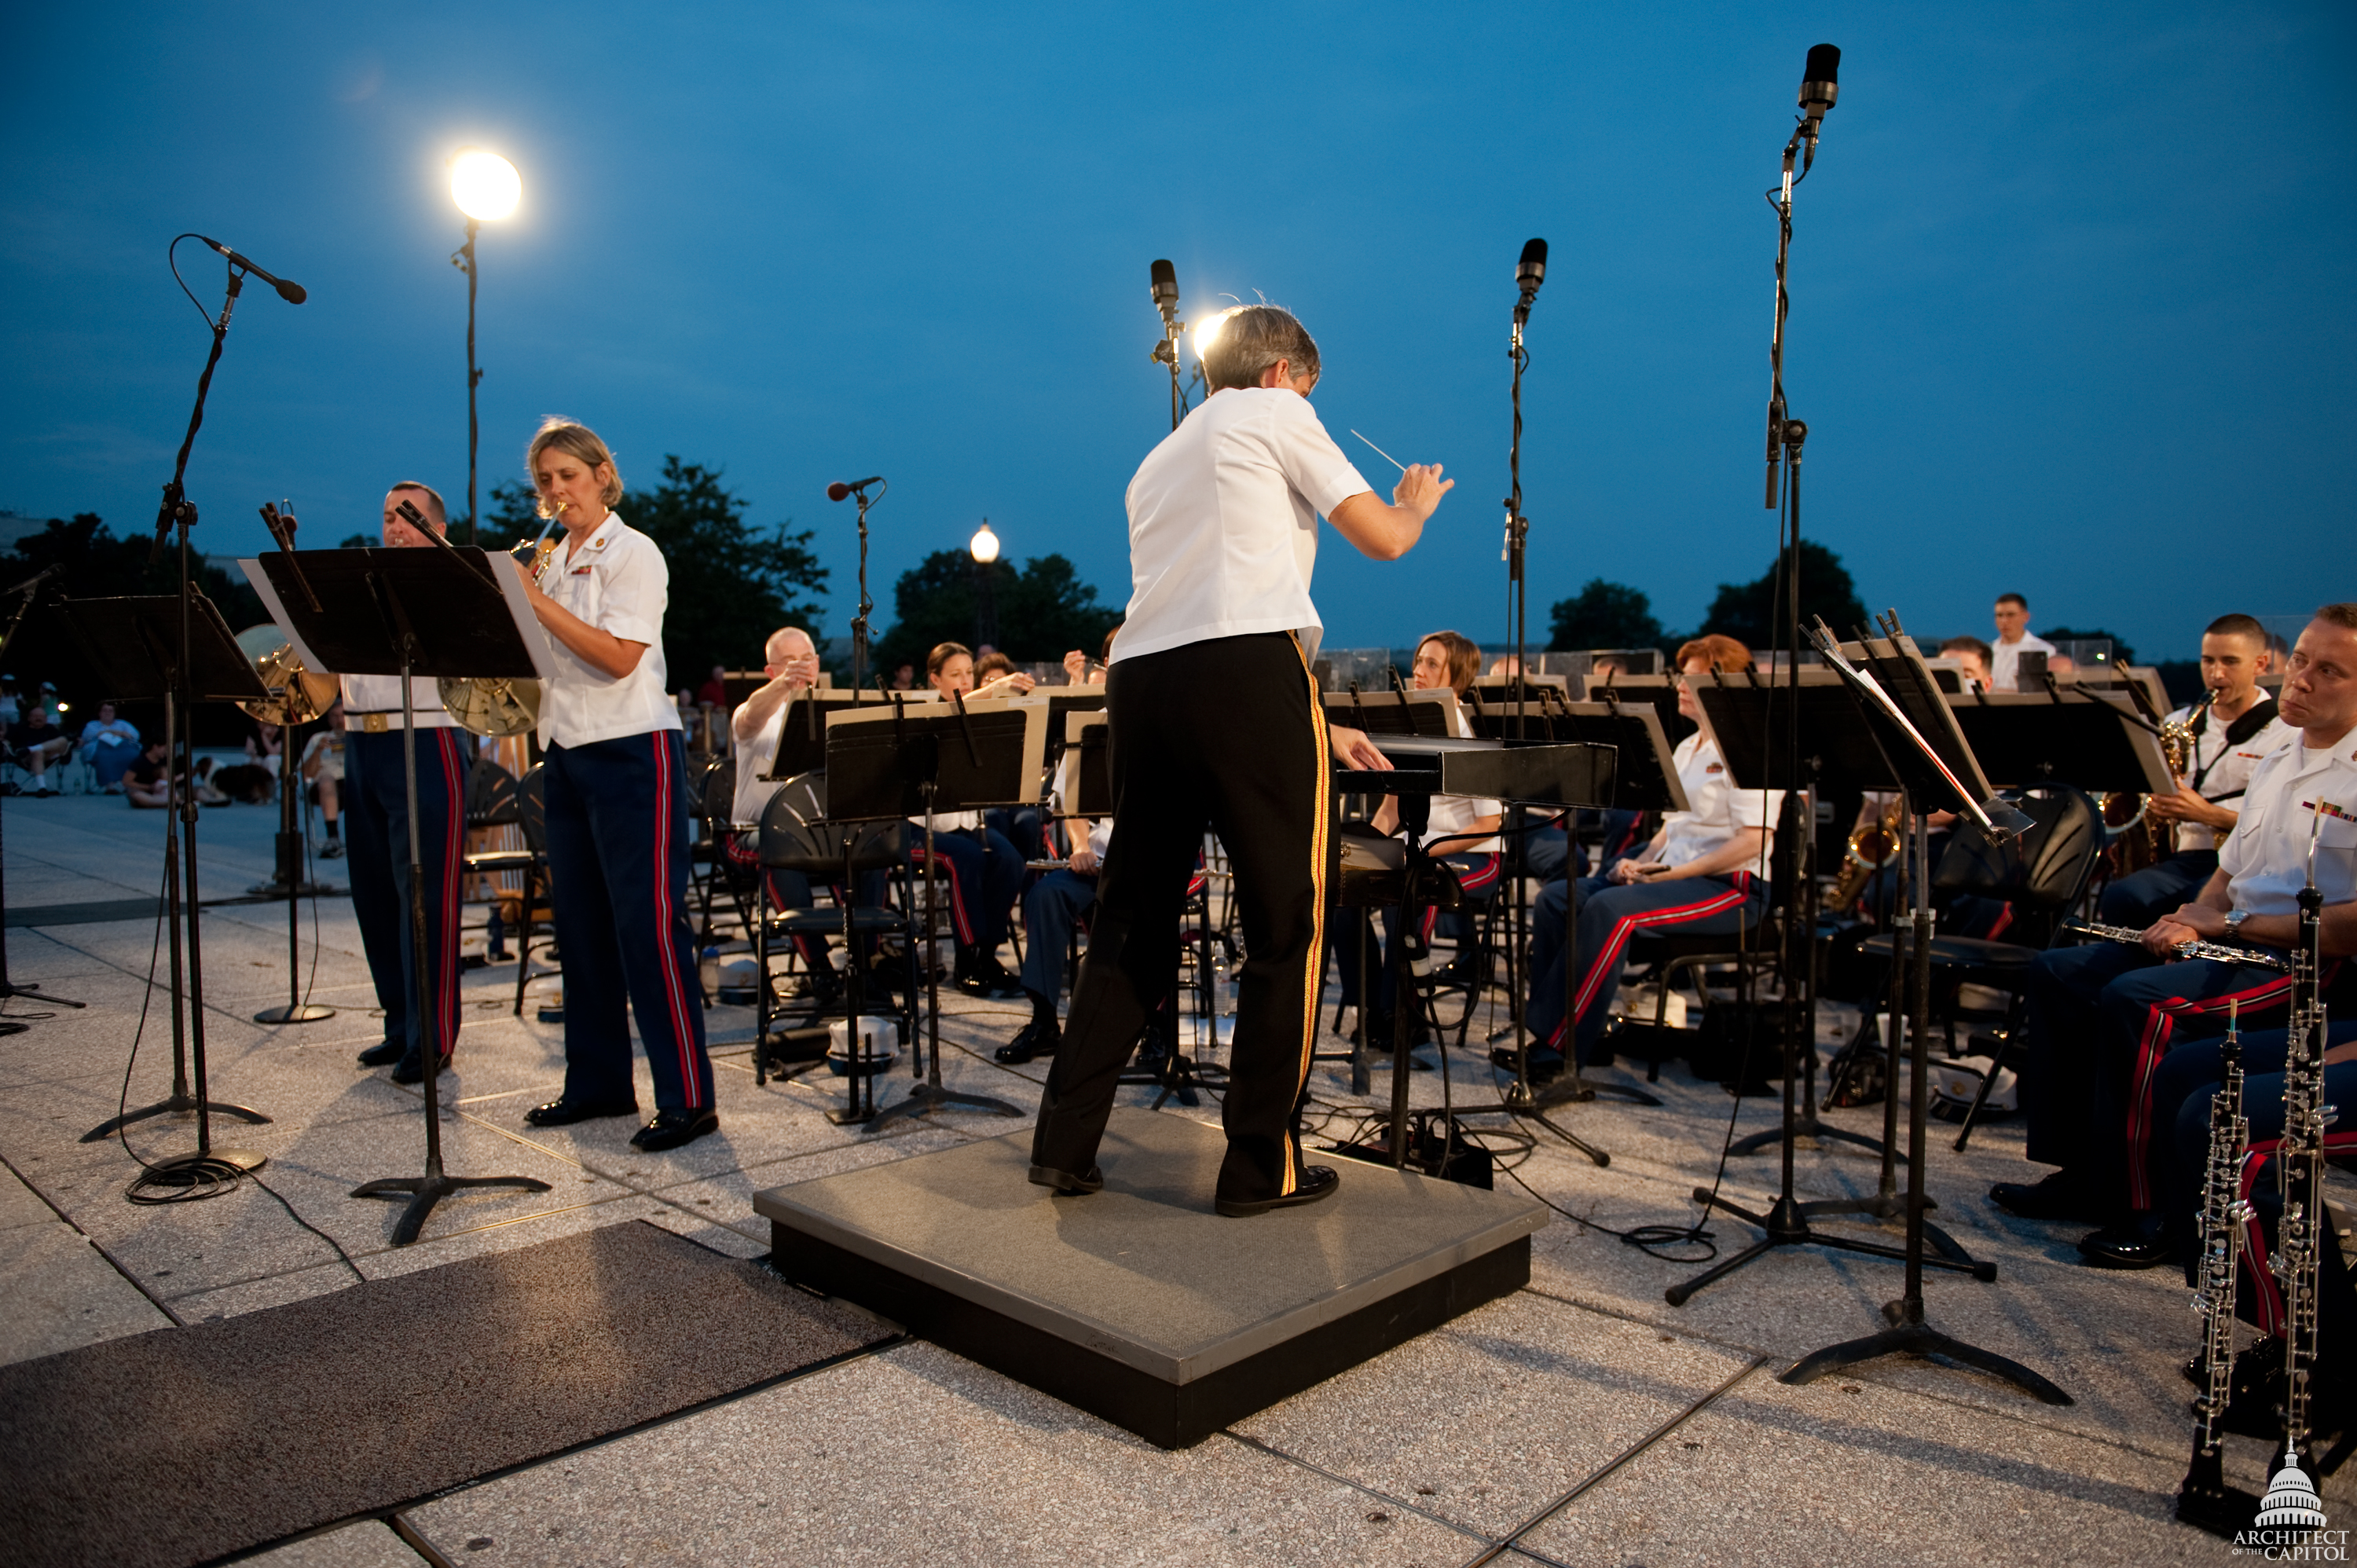 The U.S. Marine Corps Band performs on the West Front of the Capitol as part of the 2009 Summer Concert Series.